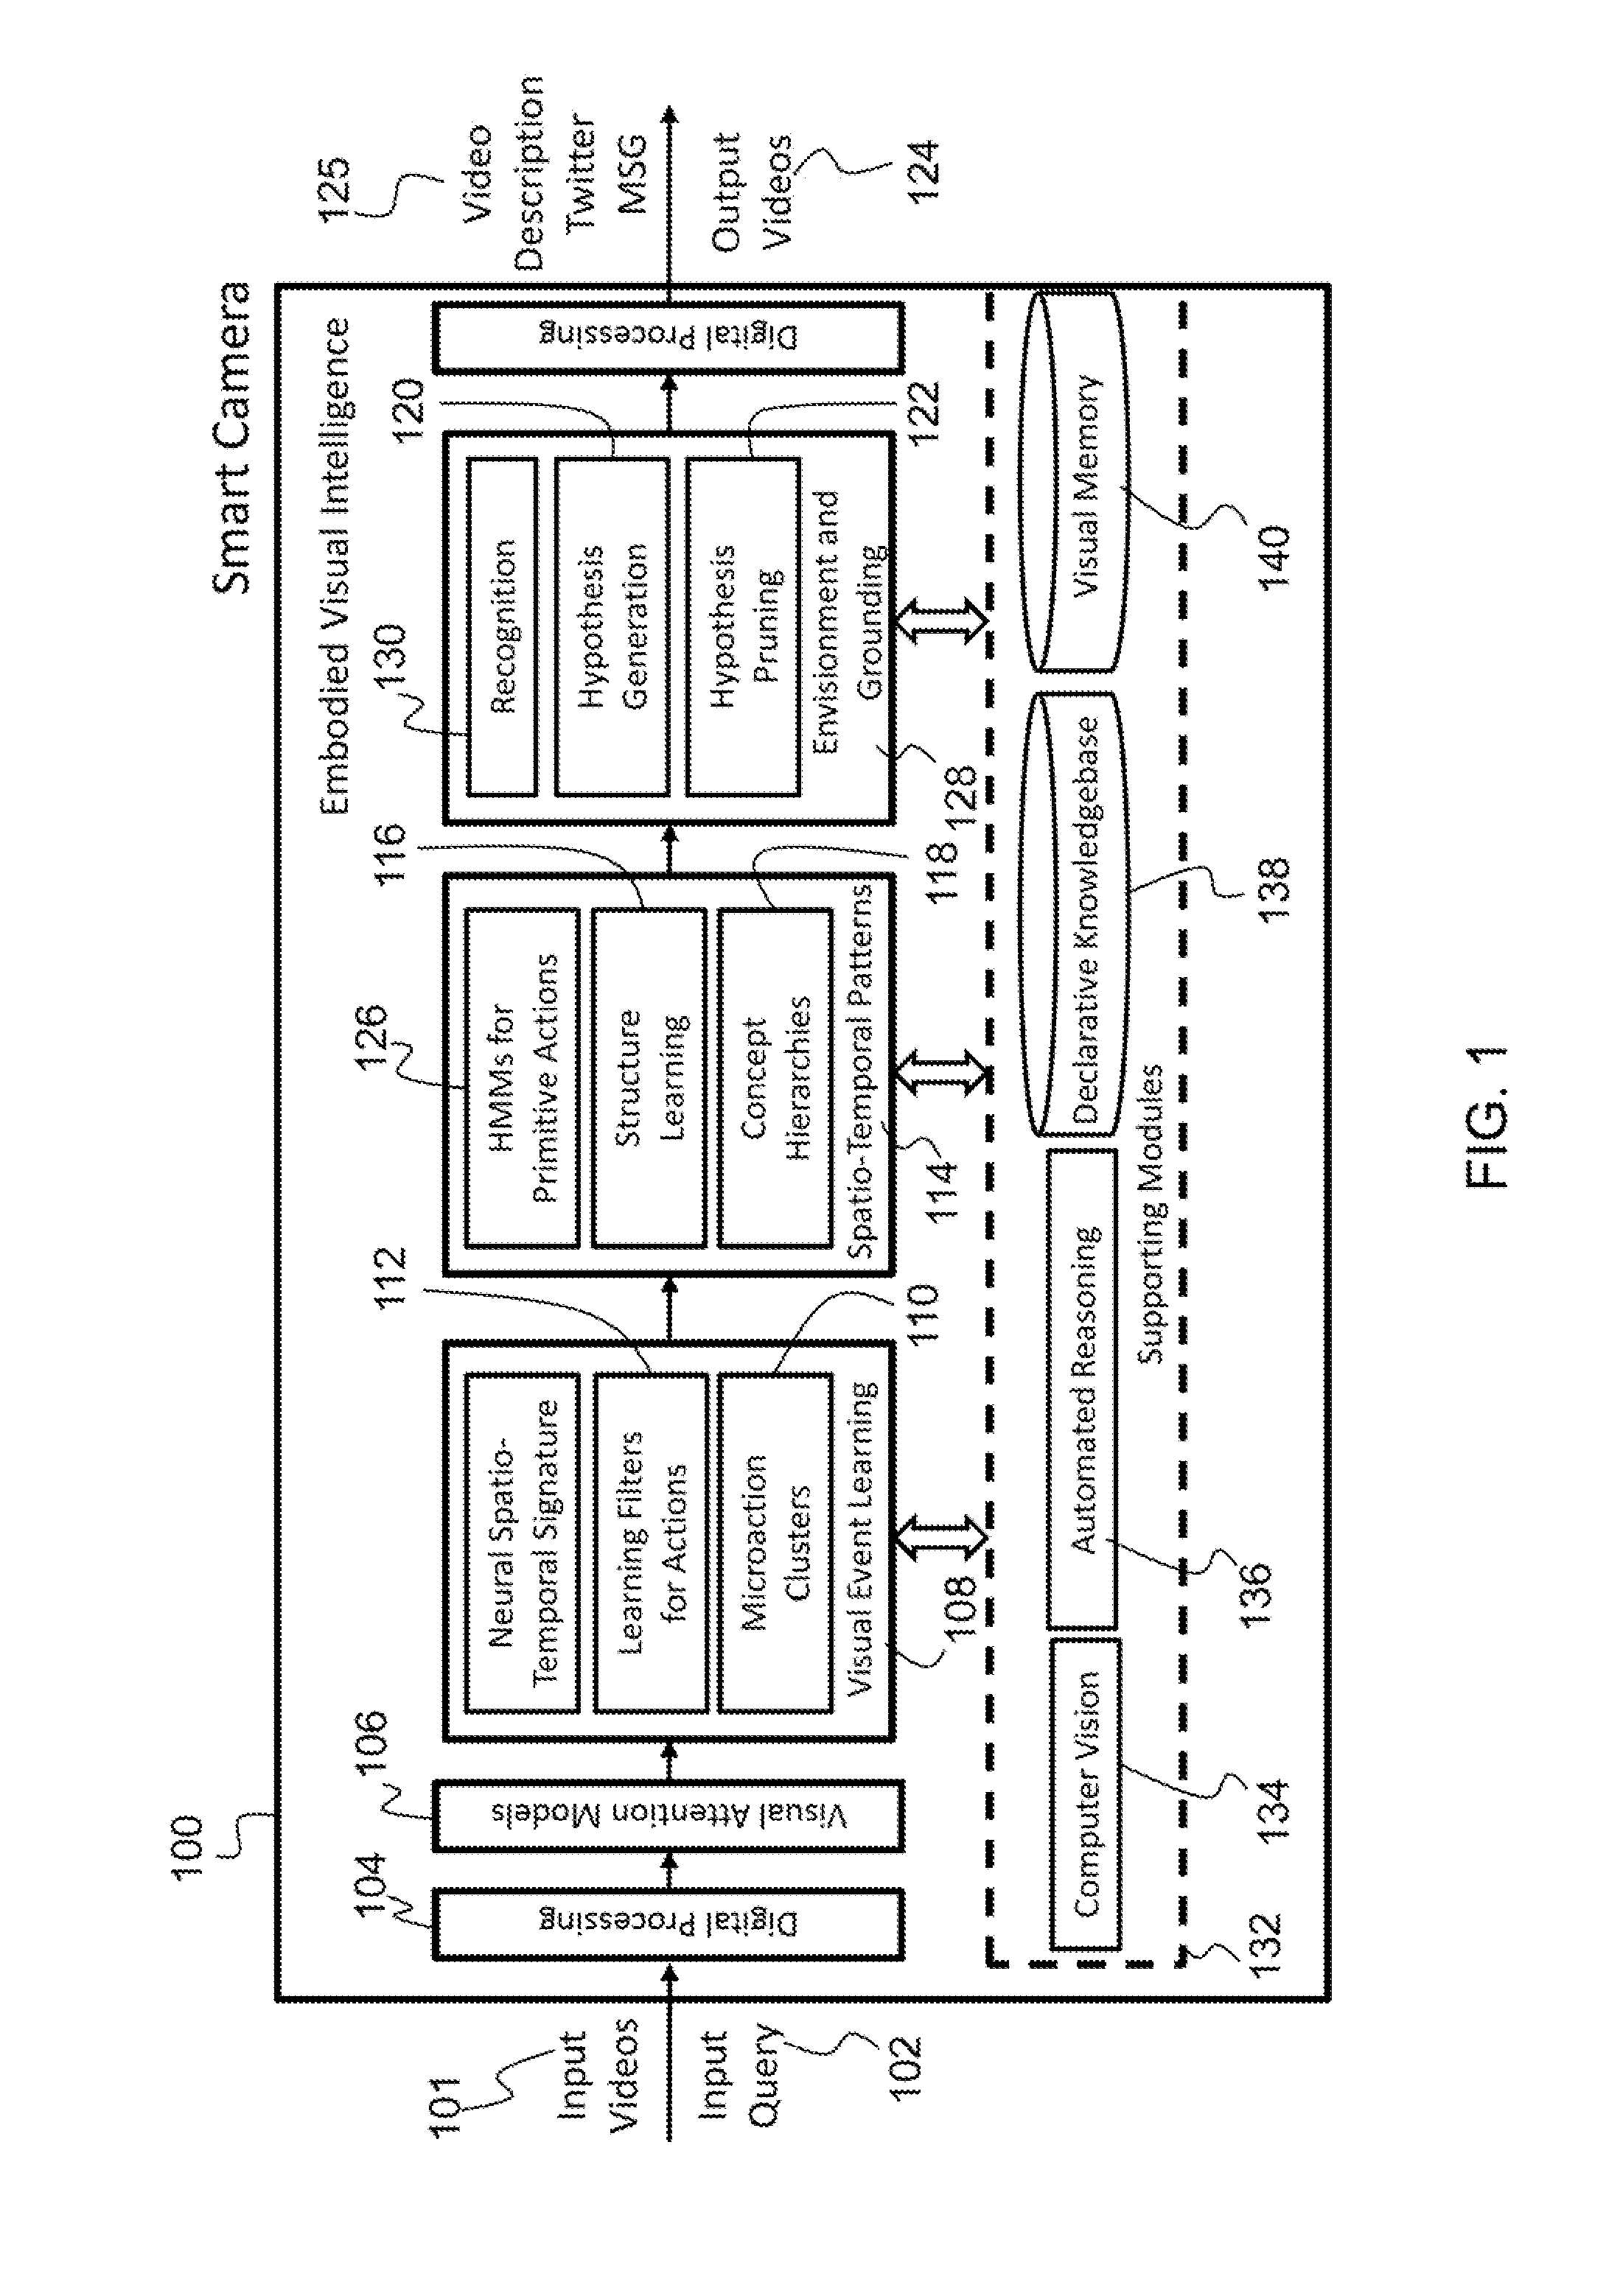 Method and system for embedding visual intelligence